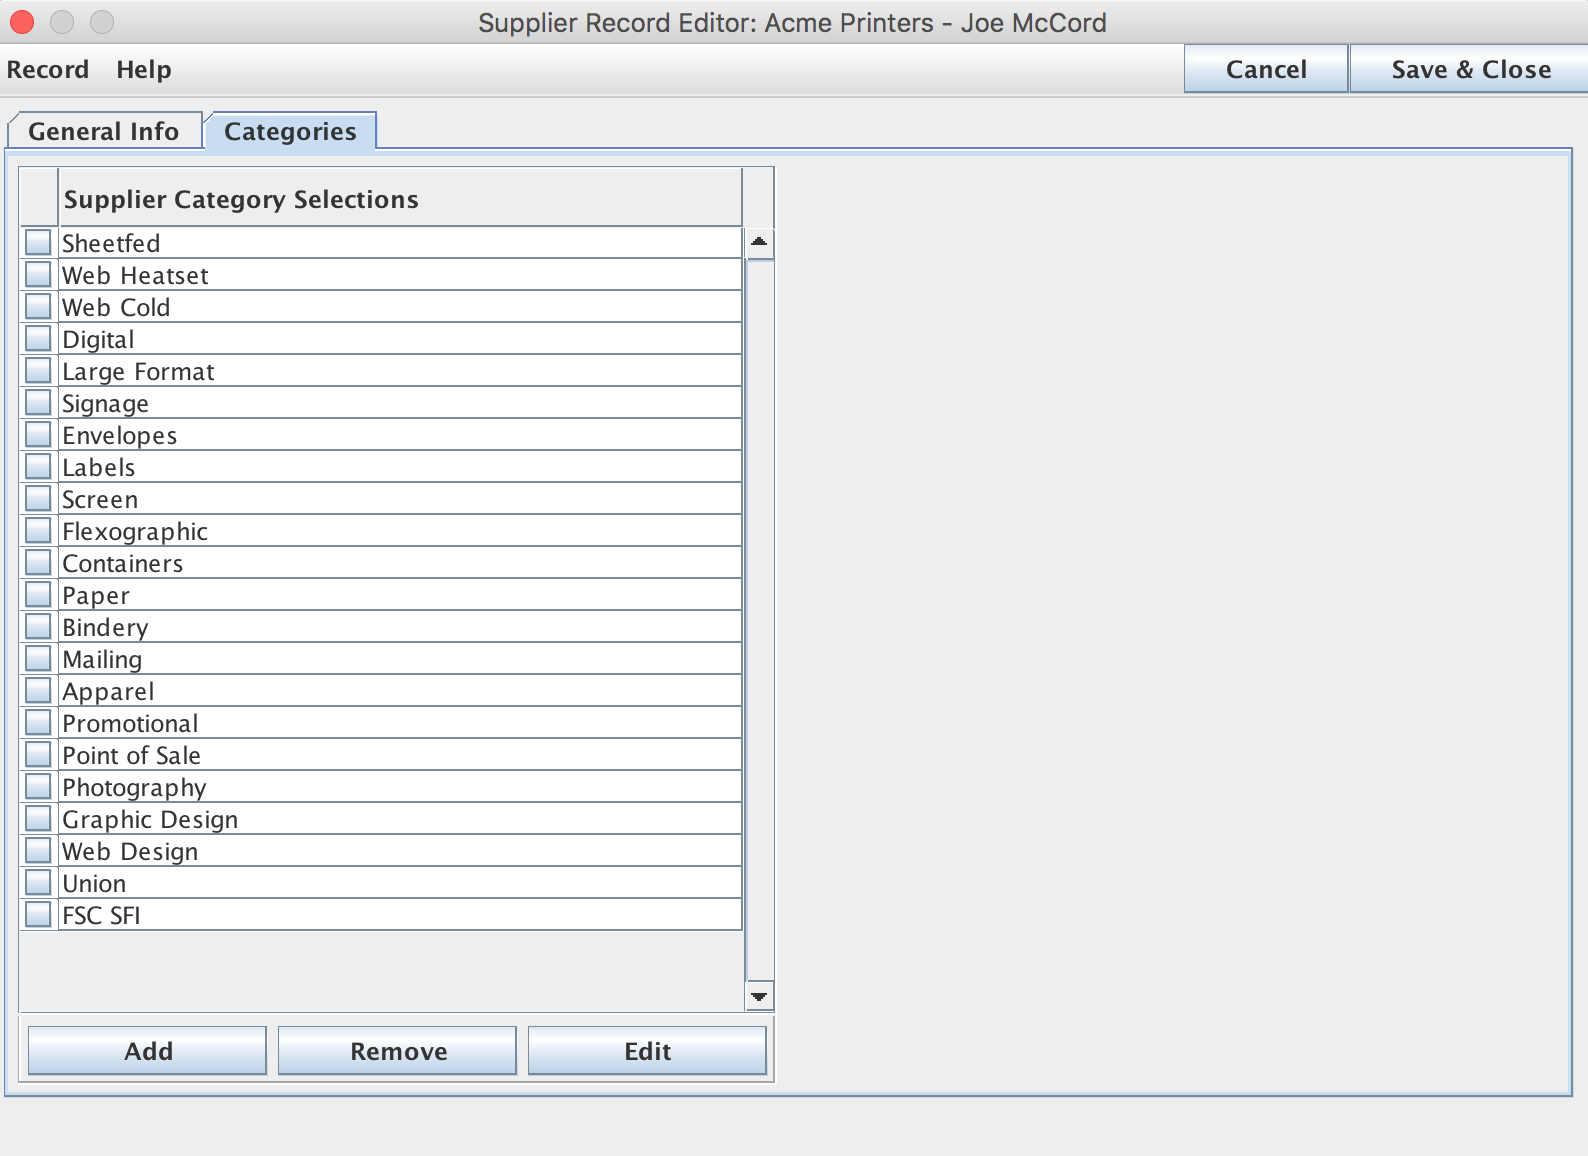 Categories Tab on the Supplier Record Editor